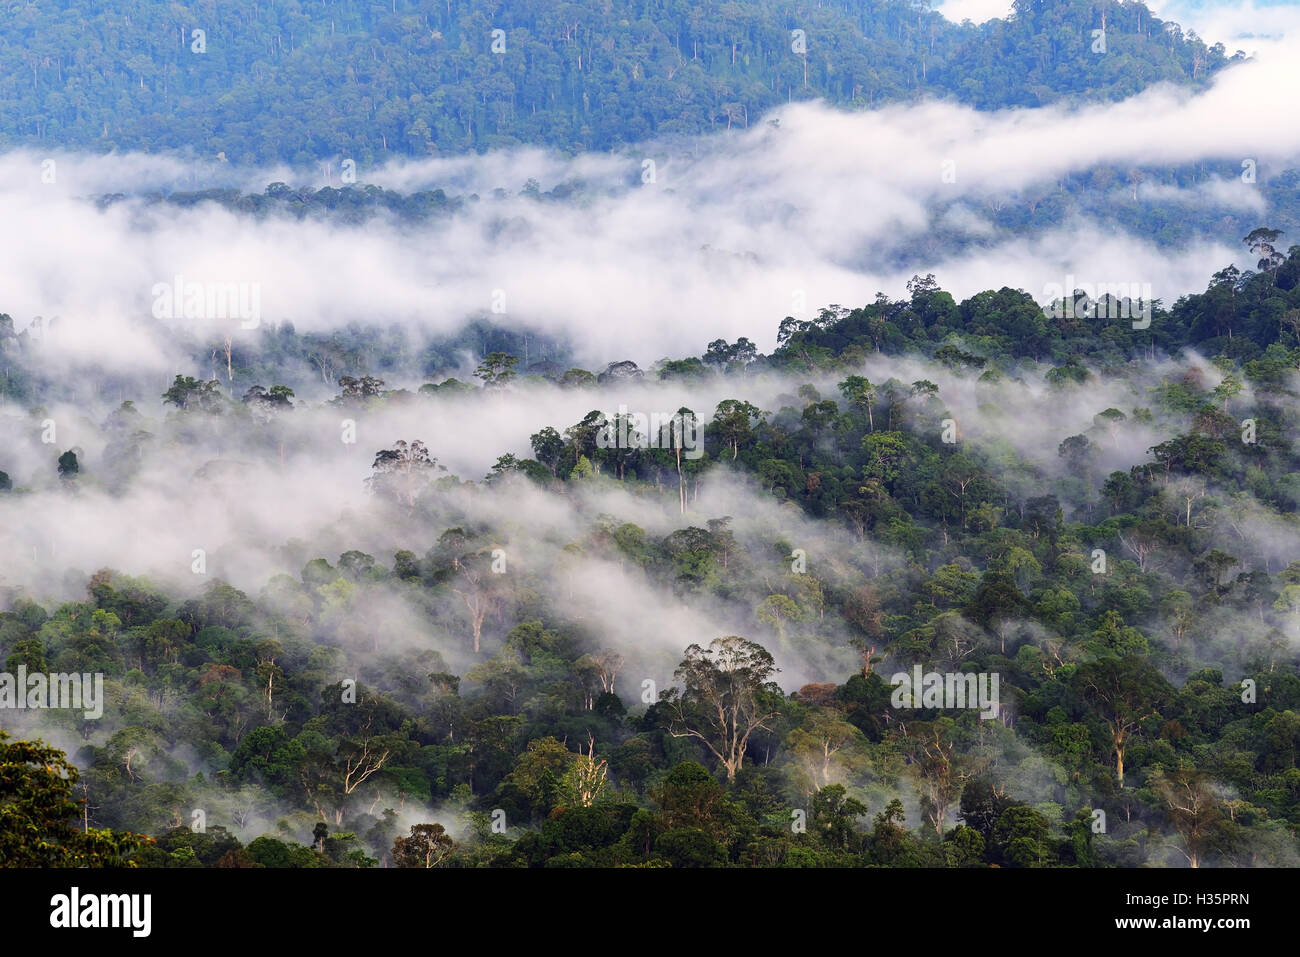 Mist and fogs over  Danum Valley jungle in Sabah Borneo, Malaysia. Danum Valley Conservation Area is a 438 square kilometres tra Stock Photo